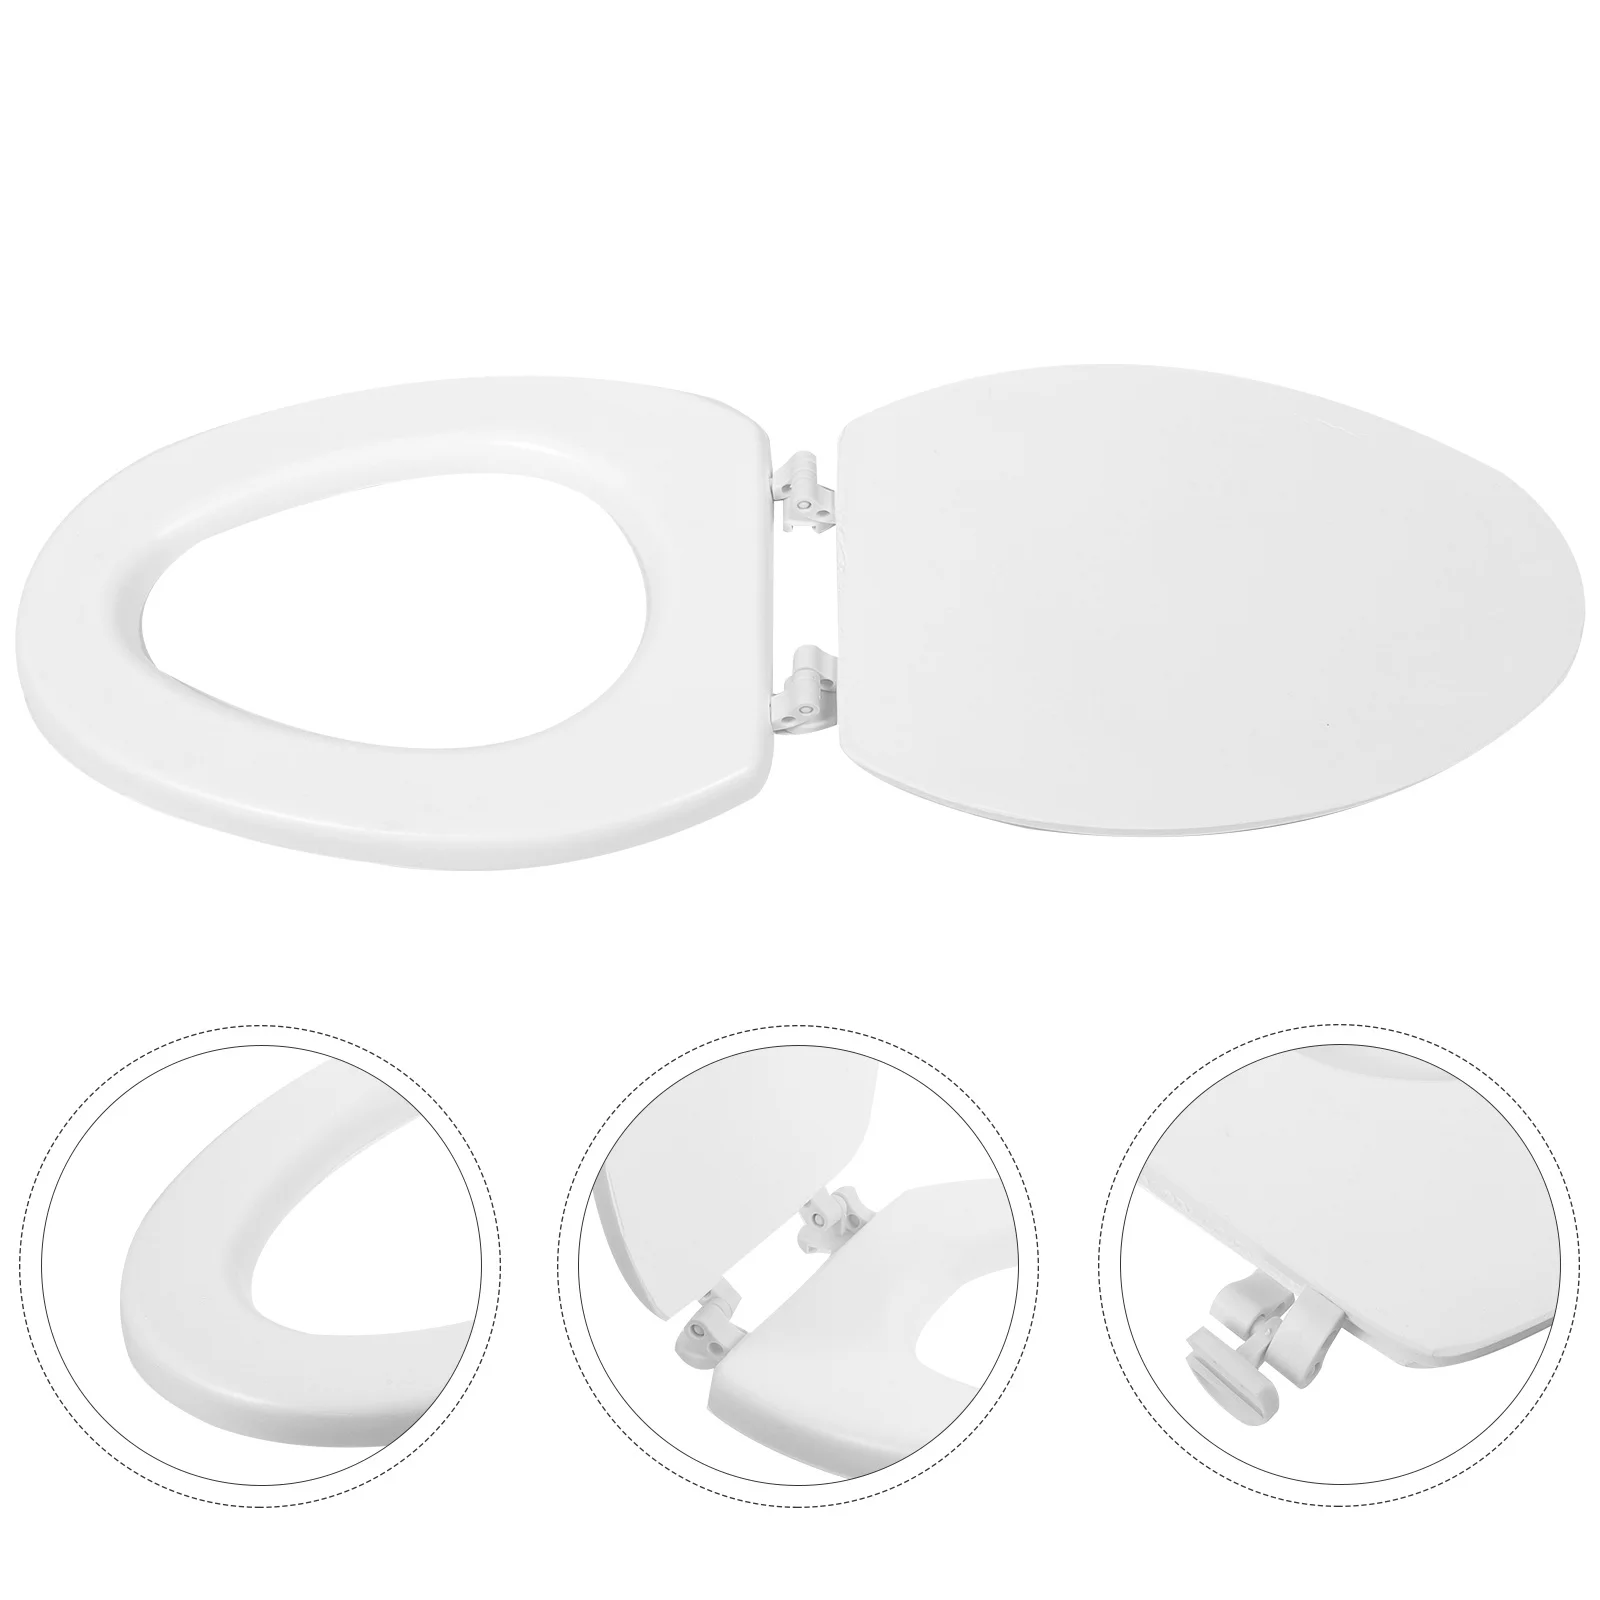 

Round Toilet Seat Quick Release Hinges Slow Close Heavy Duty Replacement Eva Toilet Seat Toilet Seat Cover Bathroom Accessories